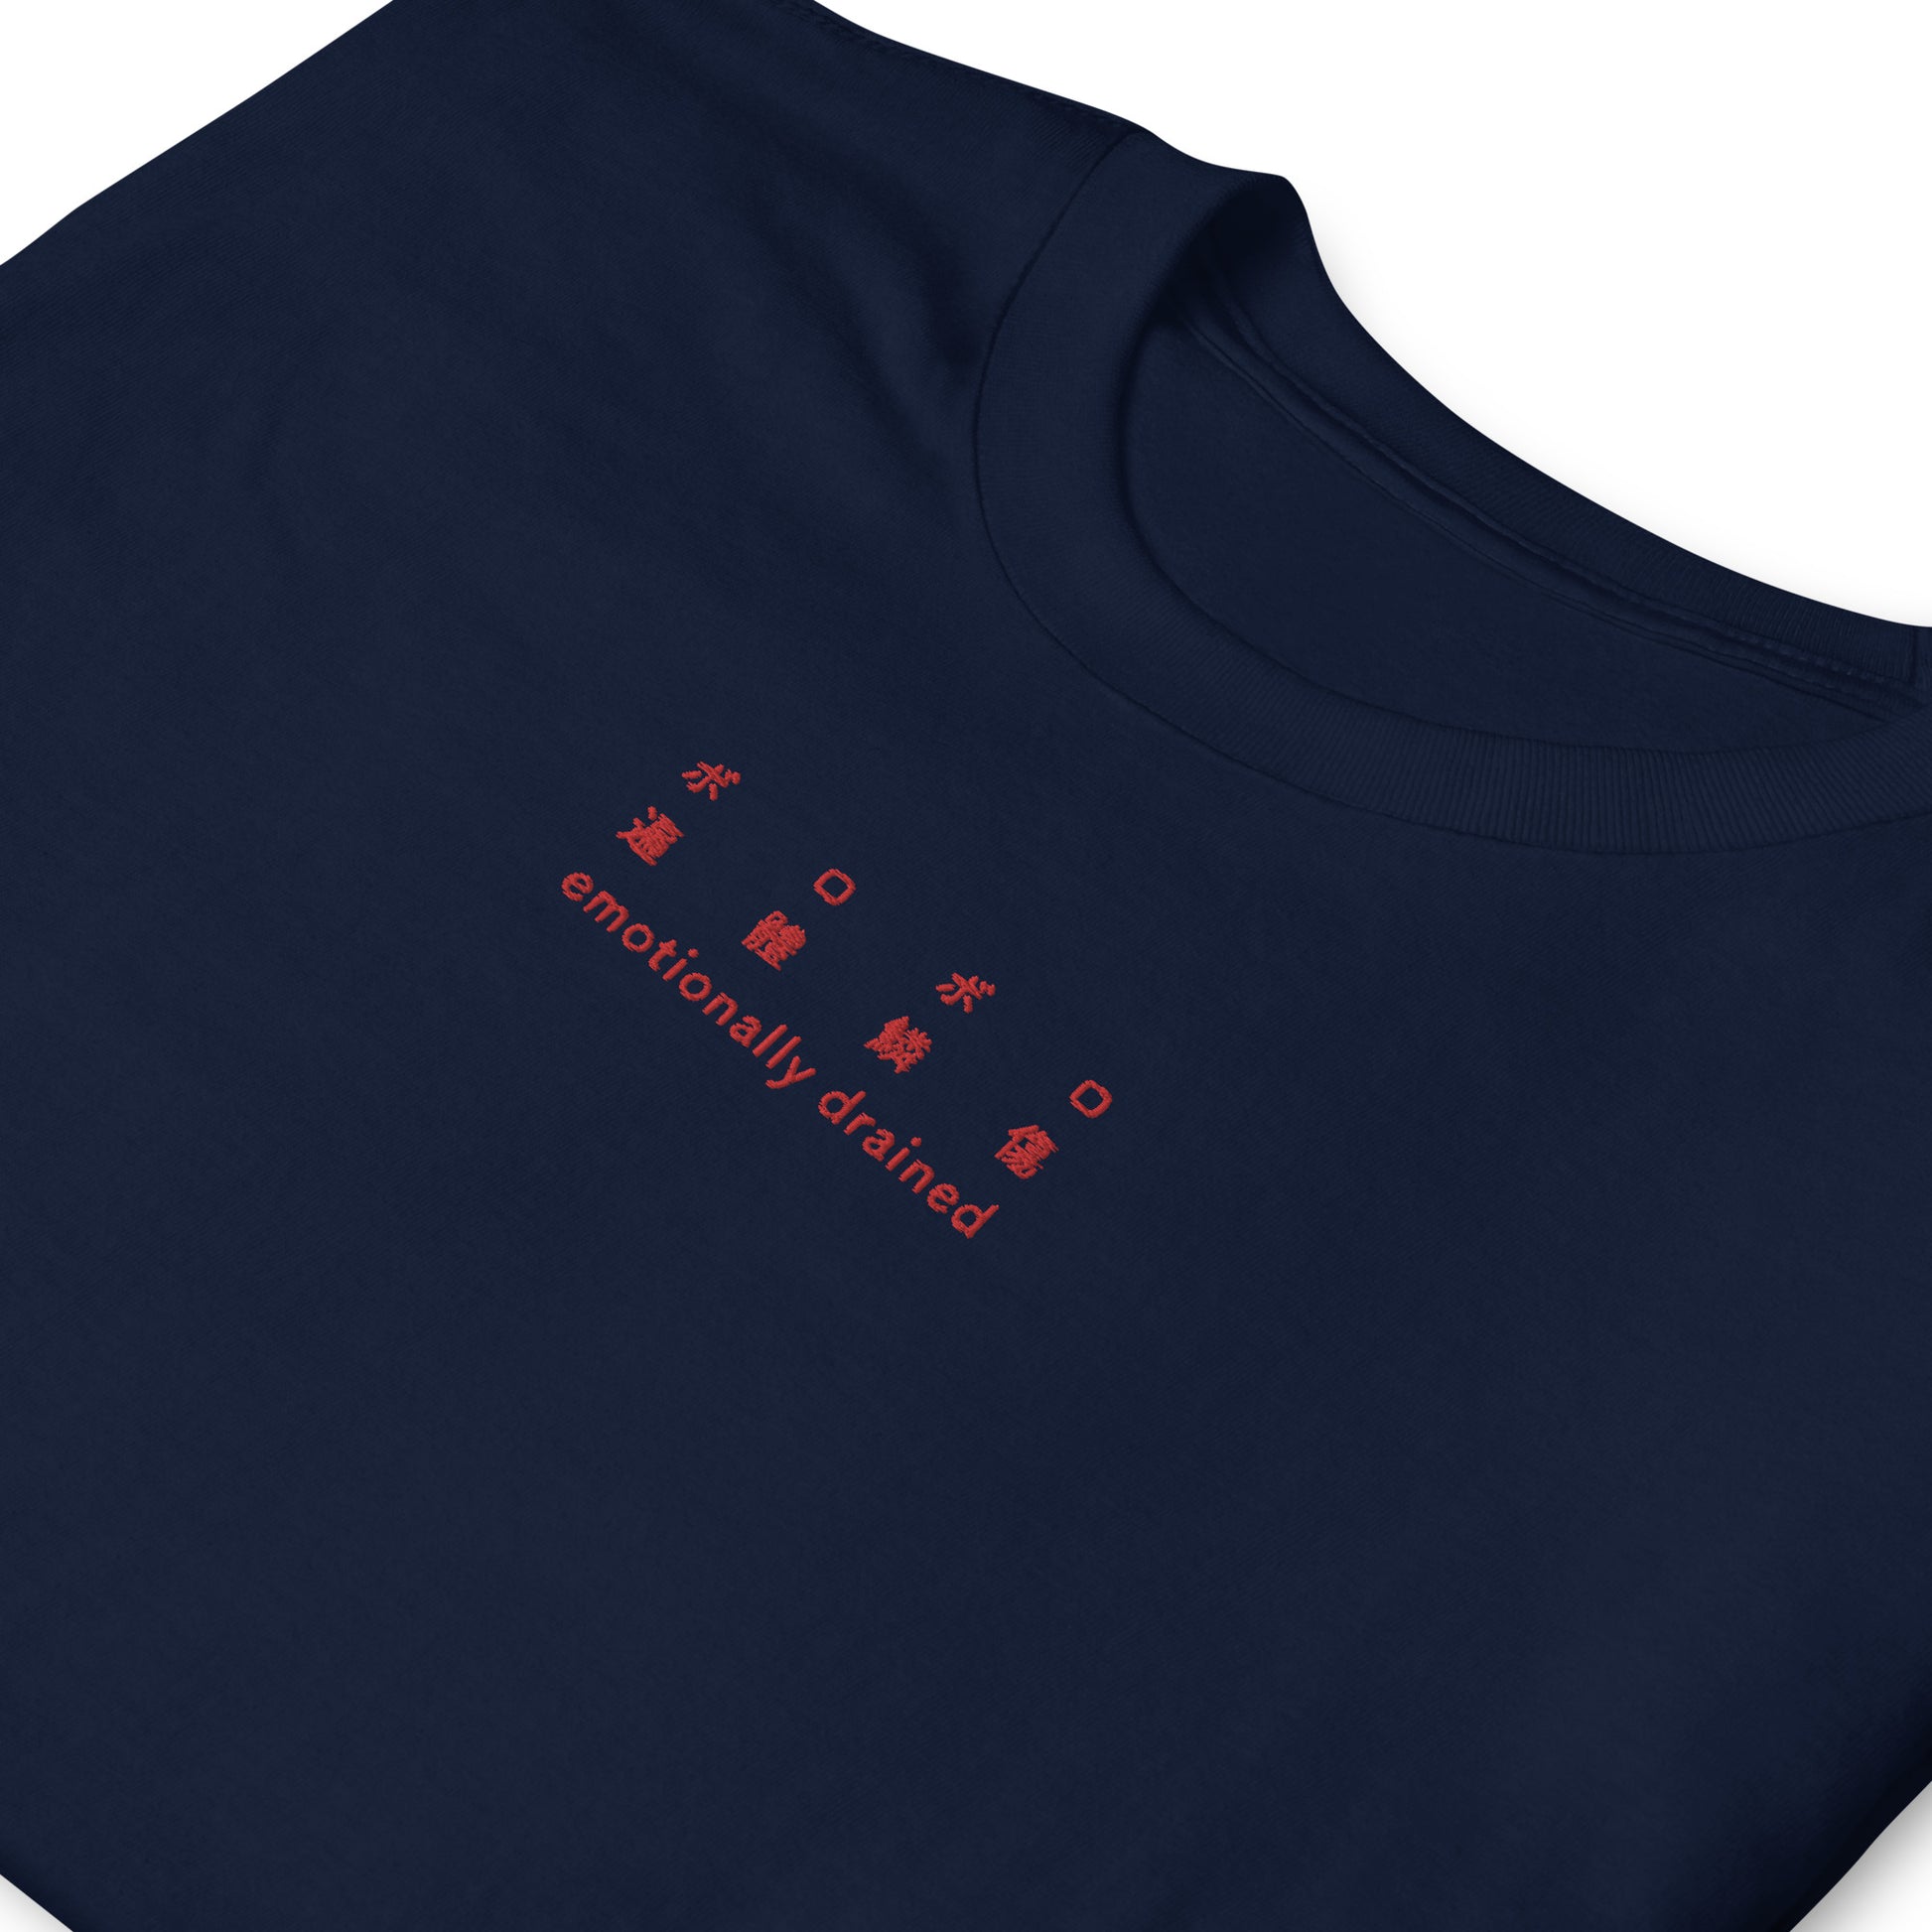 Navy High Quality Tee - Front Design with an Red Embroidery "emotionally drained" in three languages